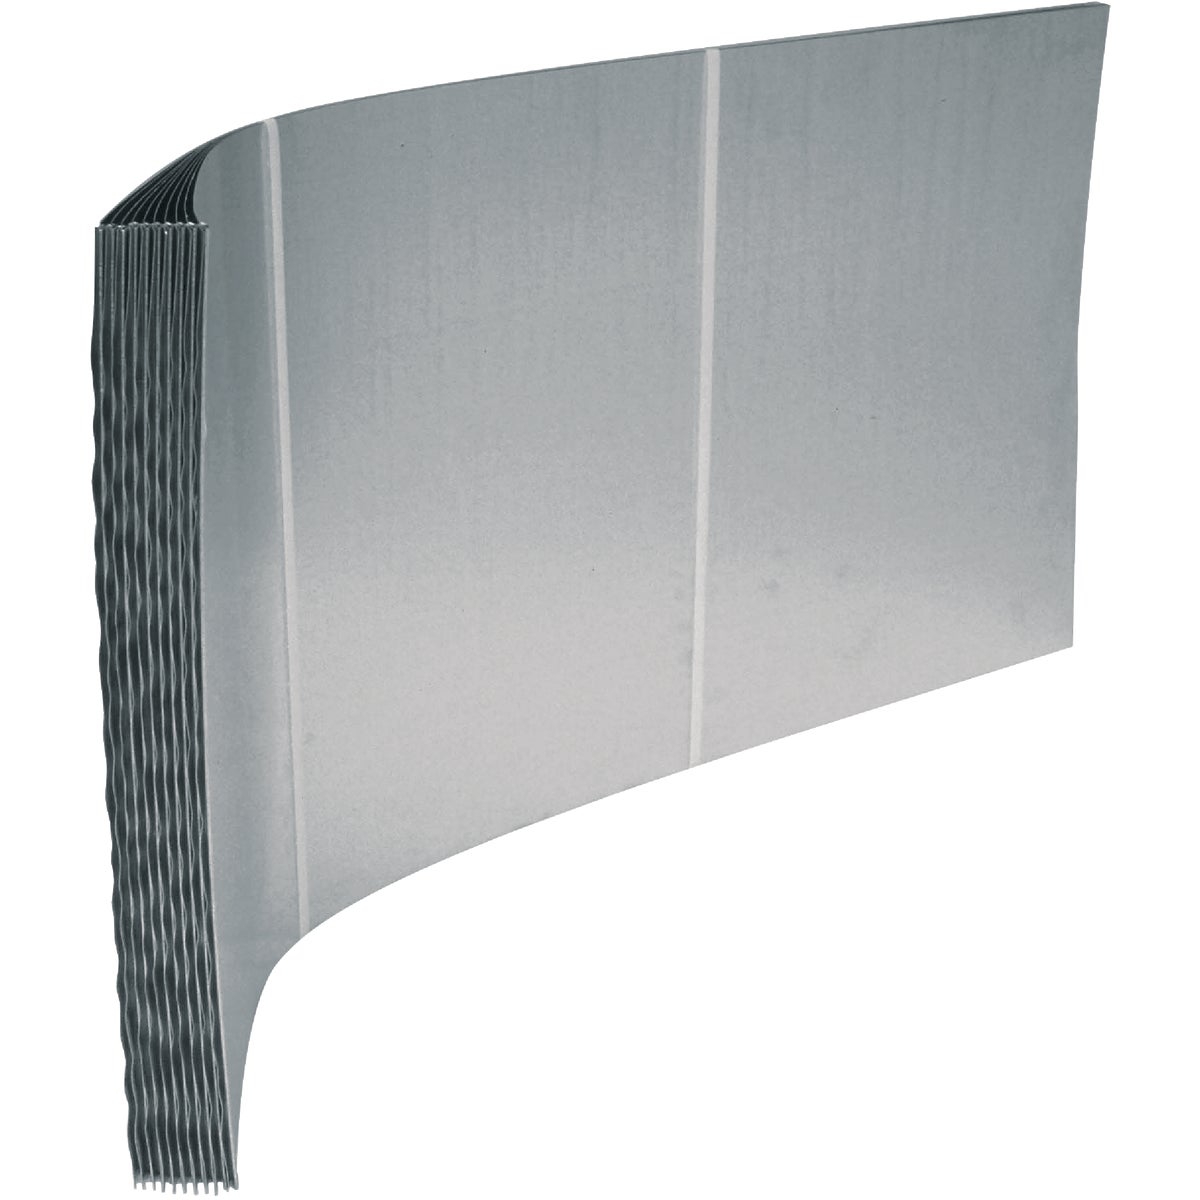 Imperial 30 Ga. 16-1/2 In. x 30 In. Galvanized Joist Lining